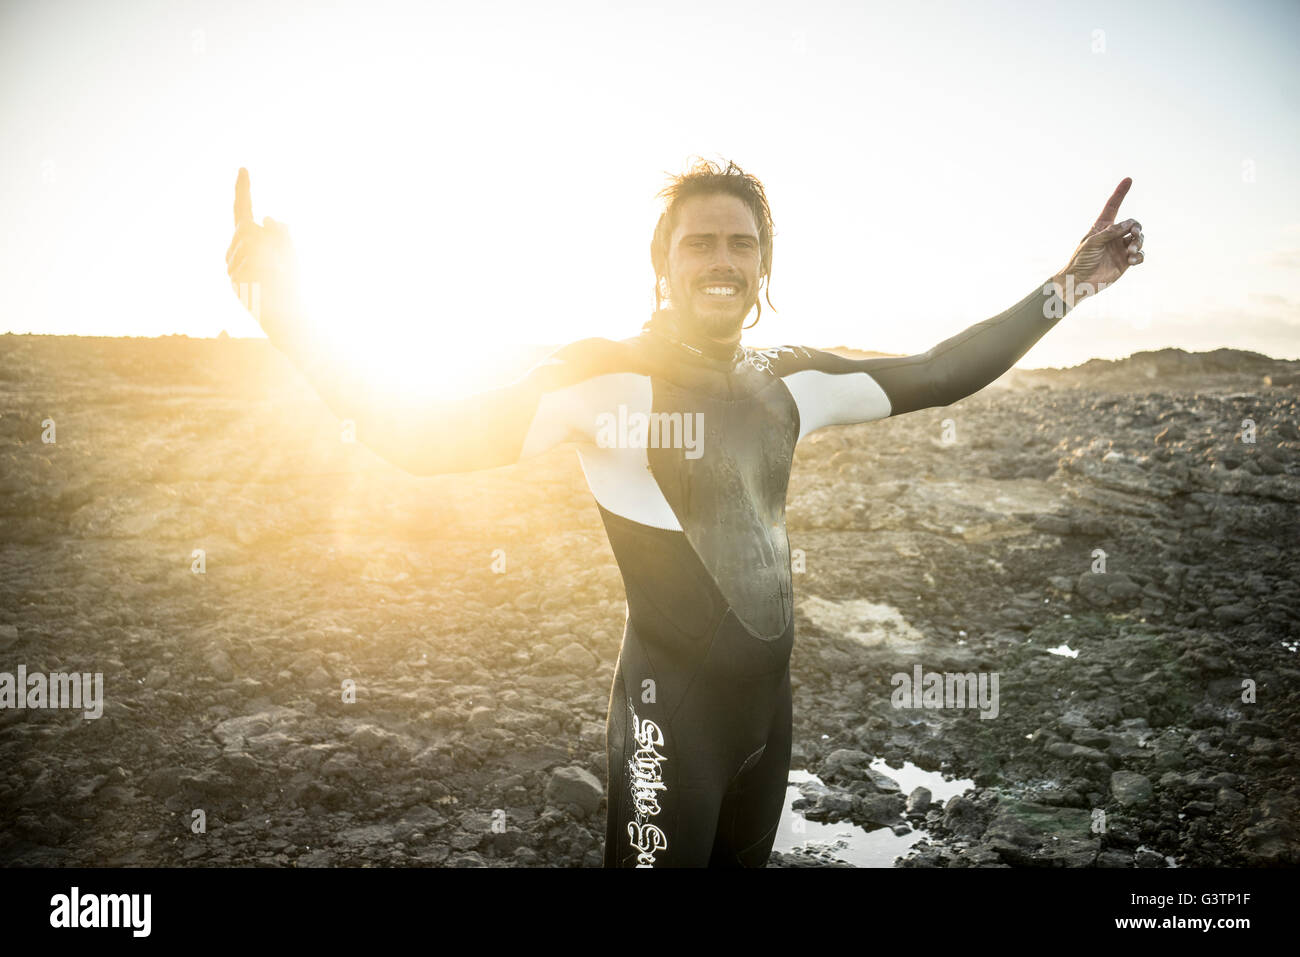 A surfer in a wetsuit raises his arms at Corralejo in Fuerteventura. Stock Photo